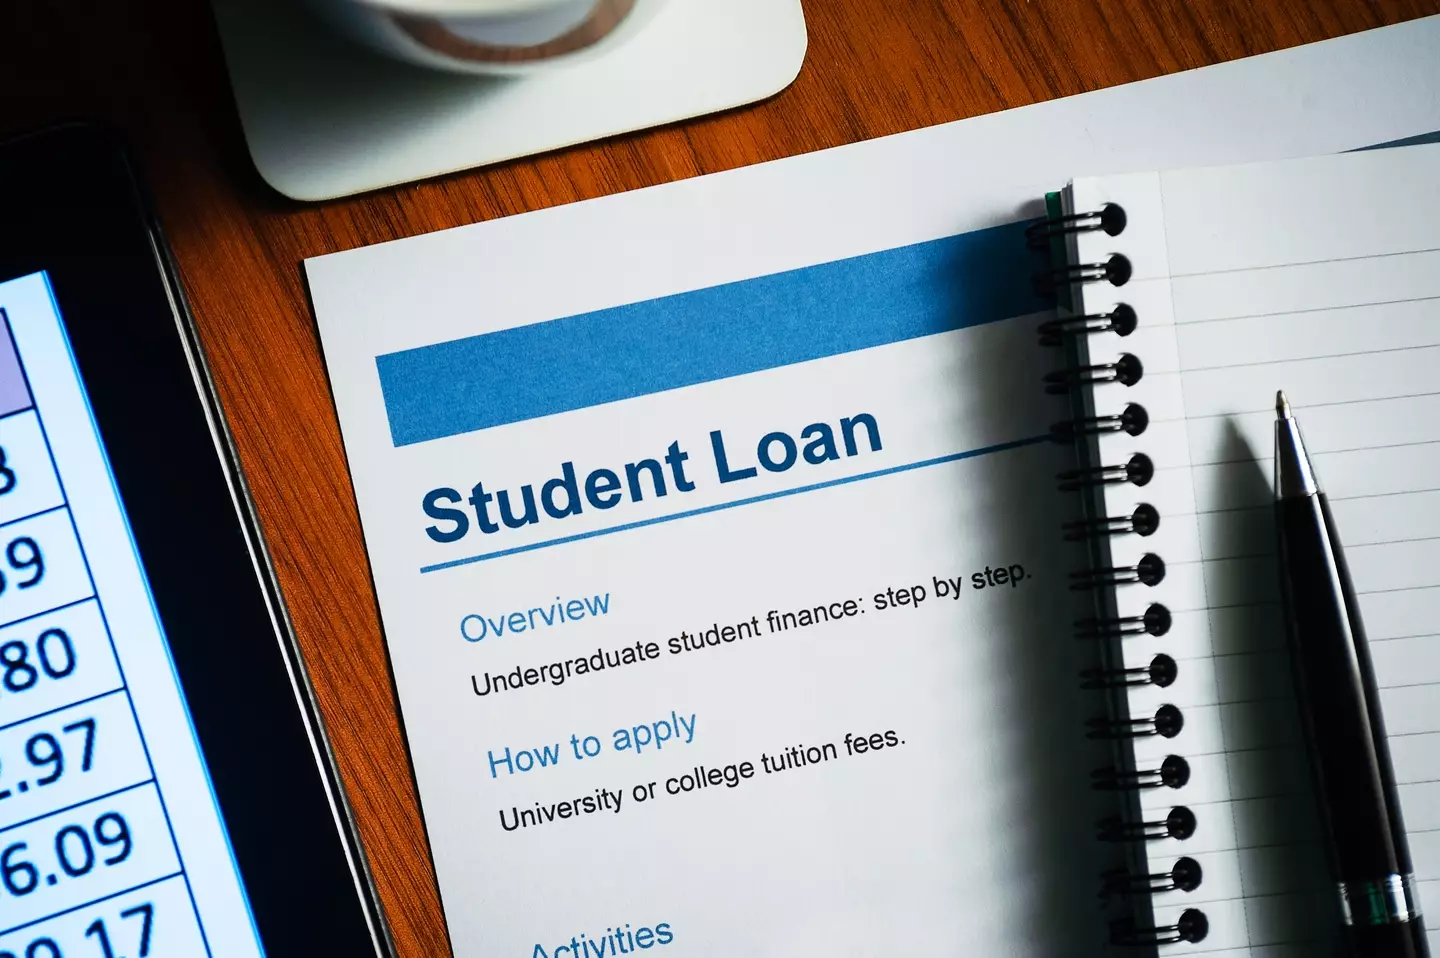 Student loan: the gift that keeps on giving.